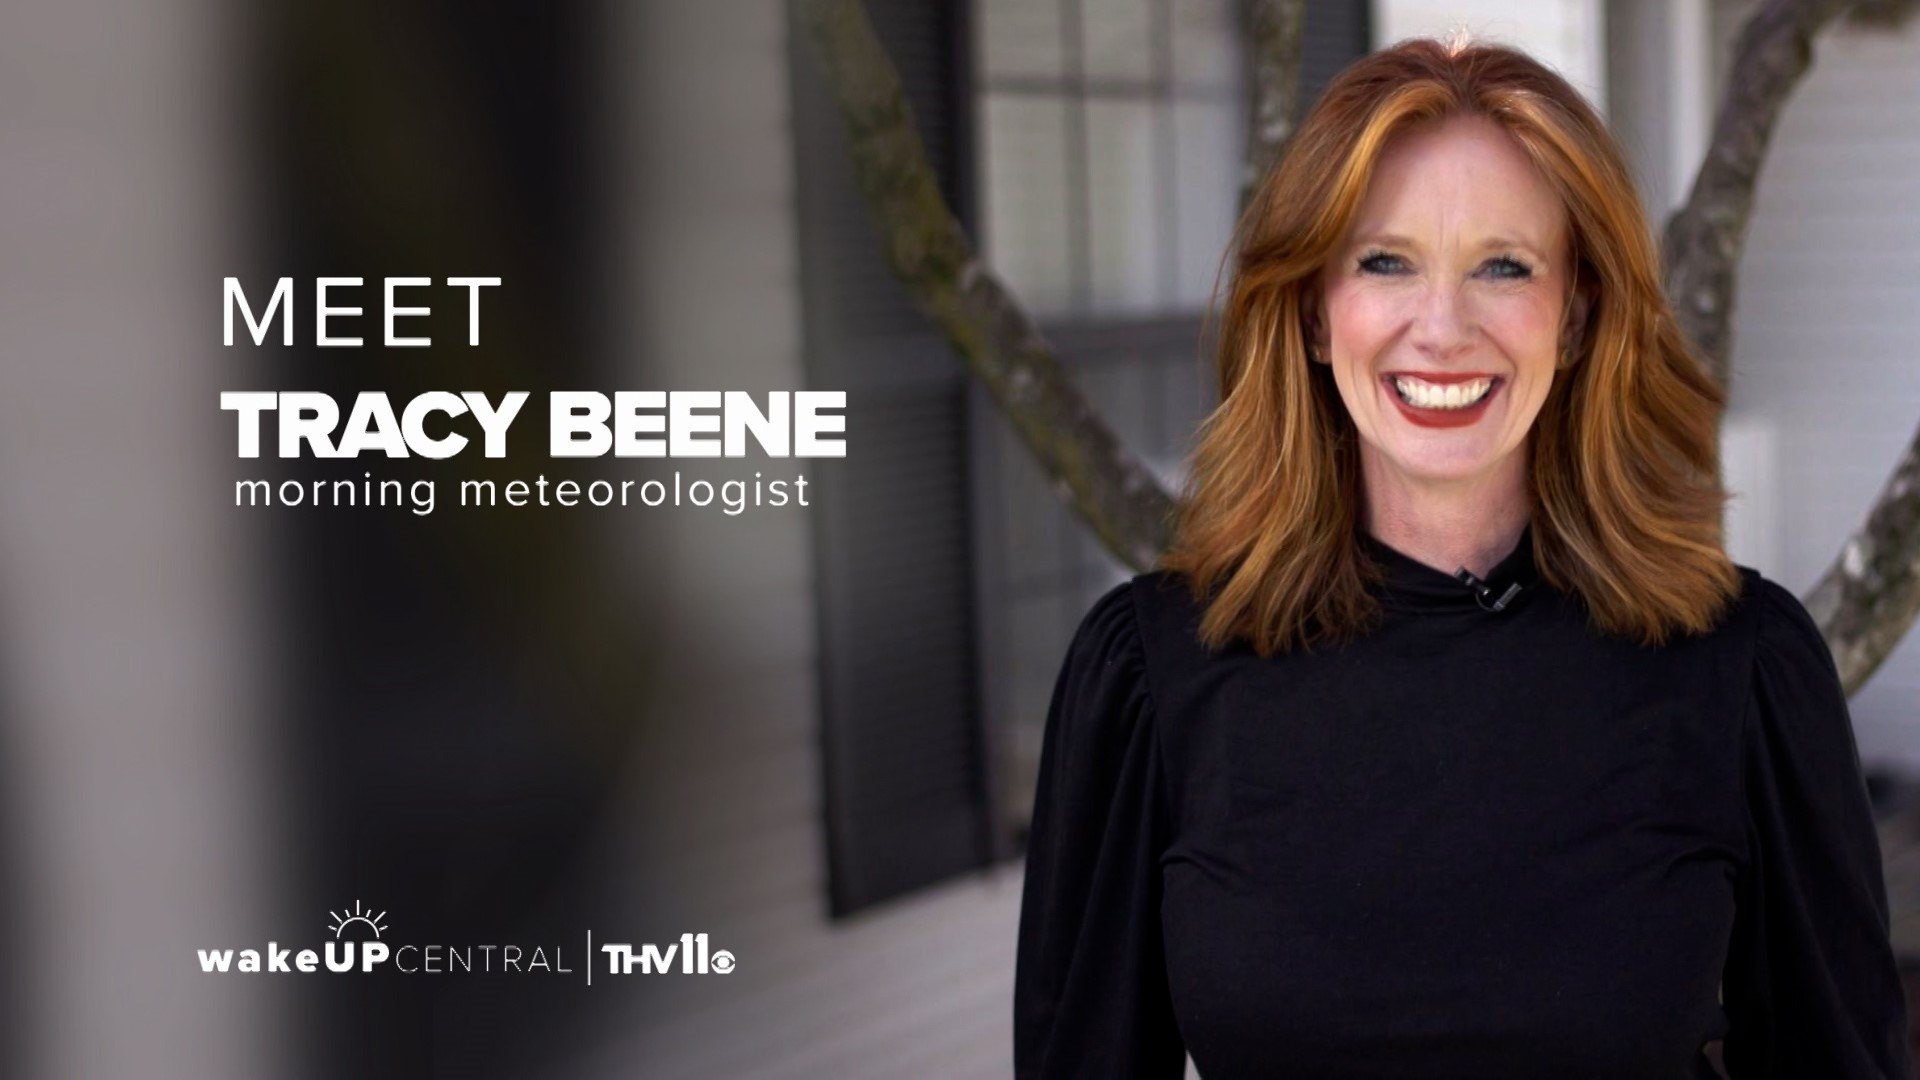 You may already know Meteorologist Tracy Beene, but if you don't here are some fun facts about her!